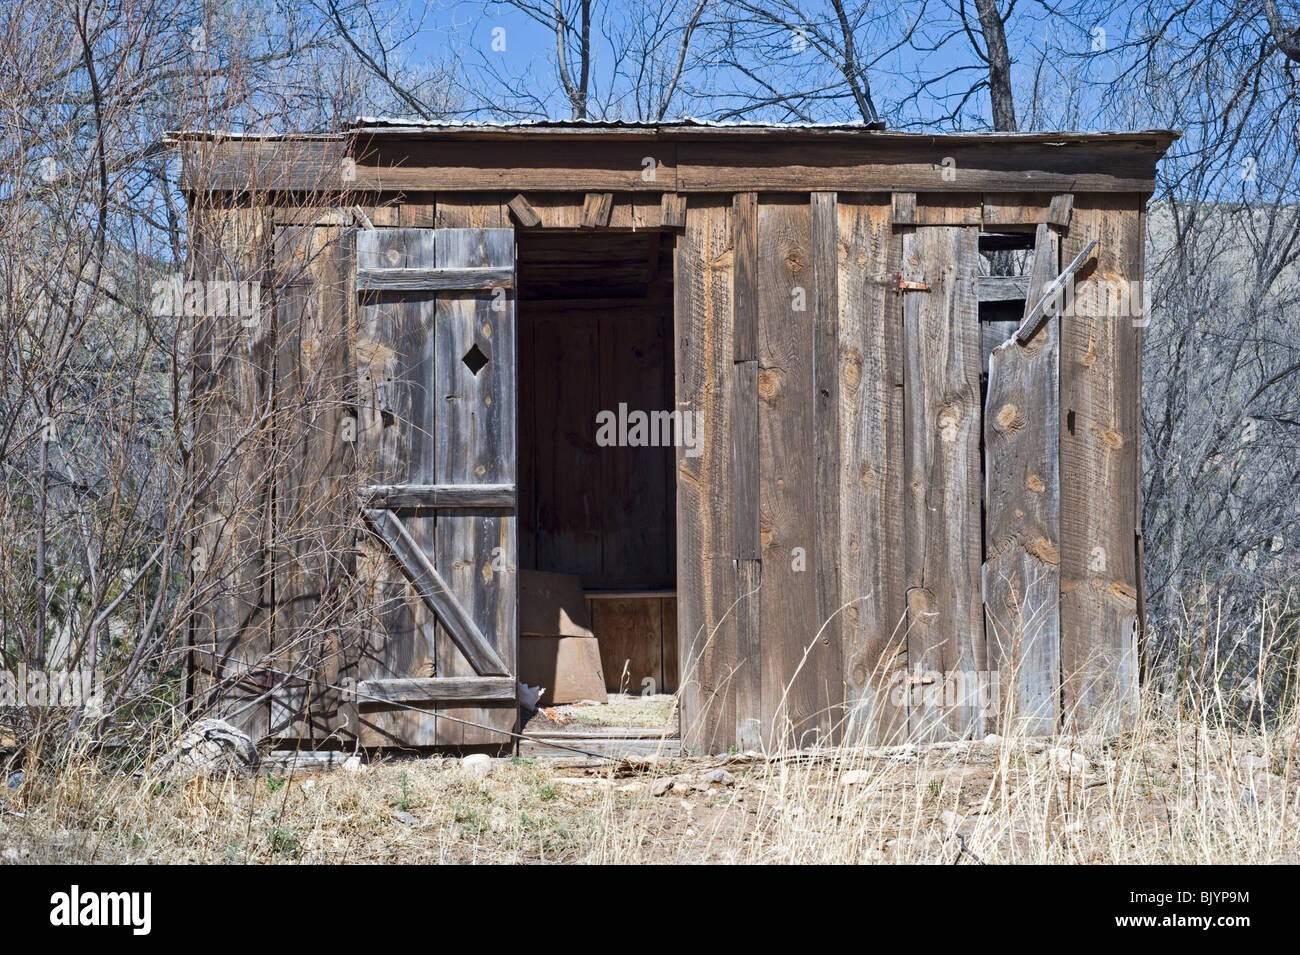 'Billy the Kid' may have relieved himself in this old-fashioned out-house found in Lincoln, New Mexico. Stock Photo